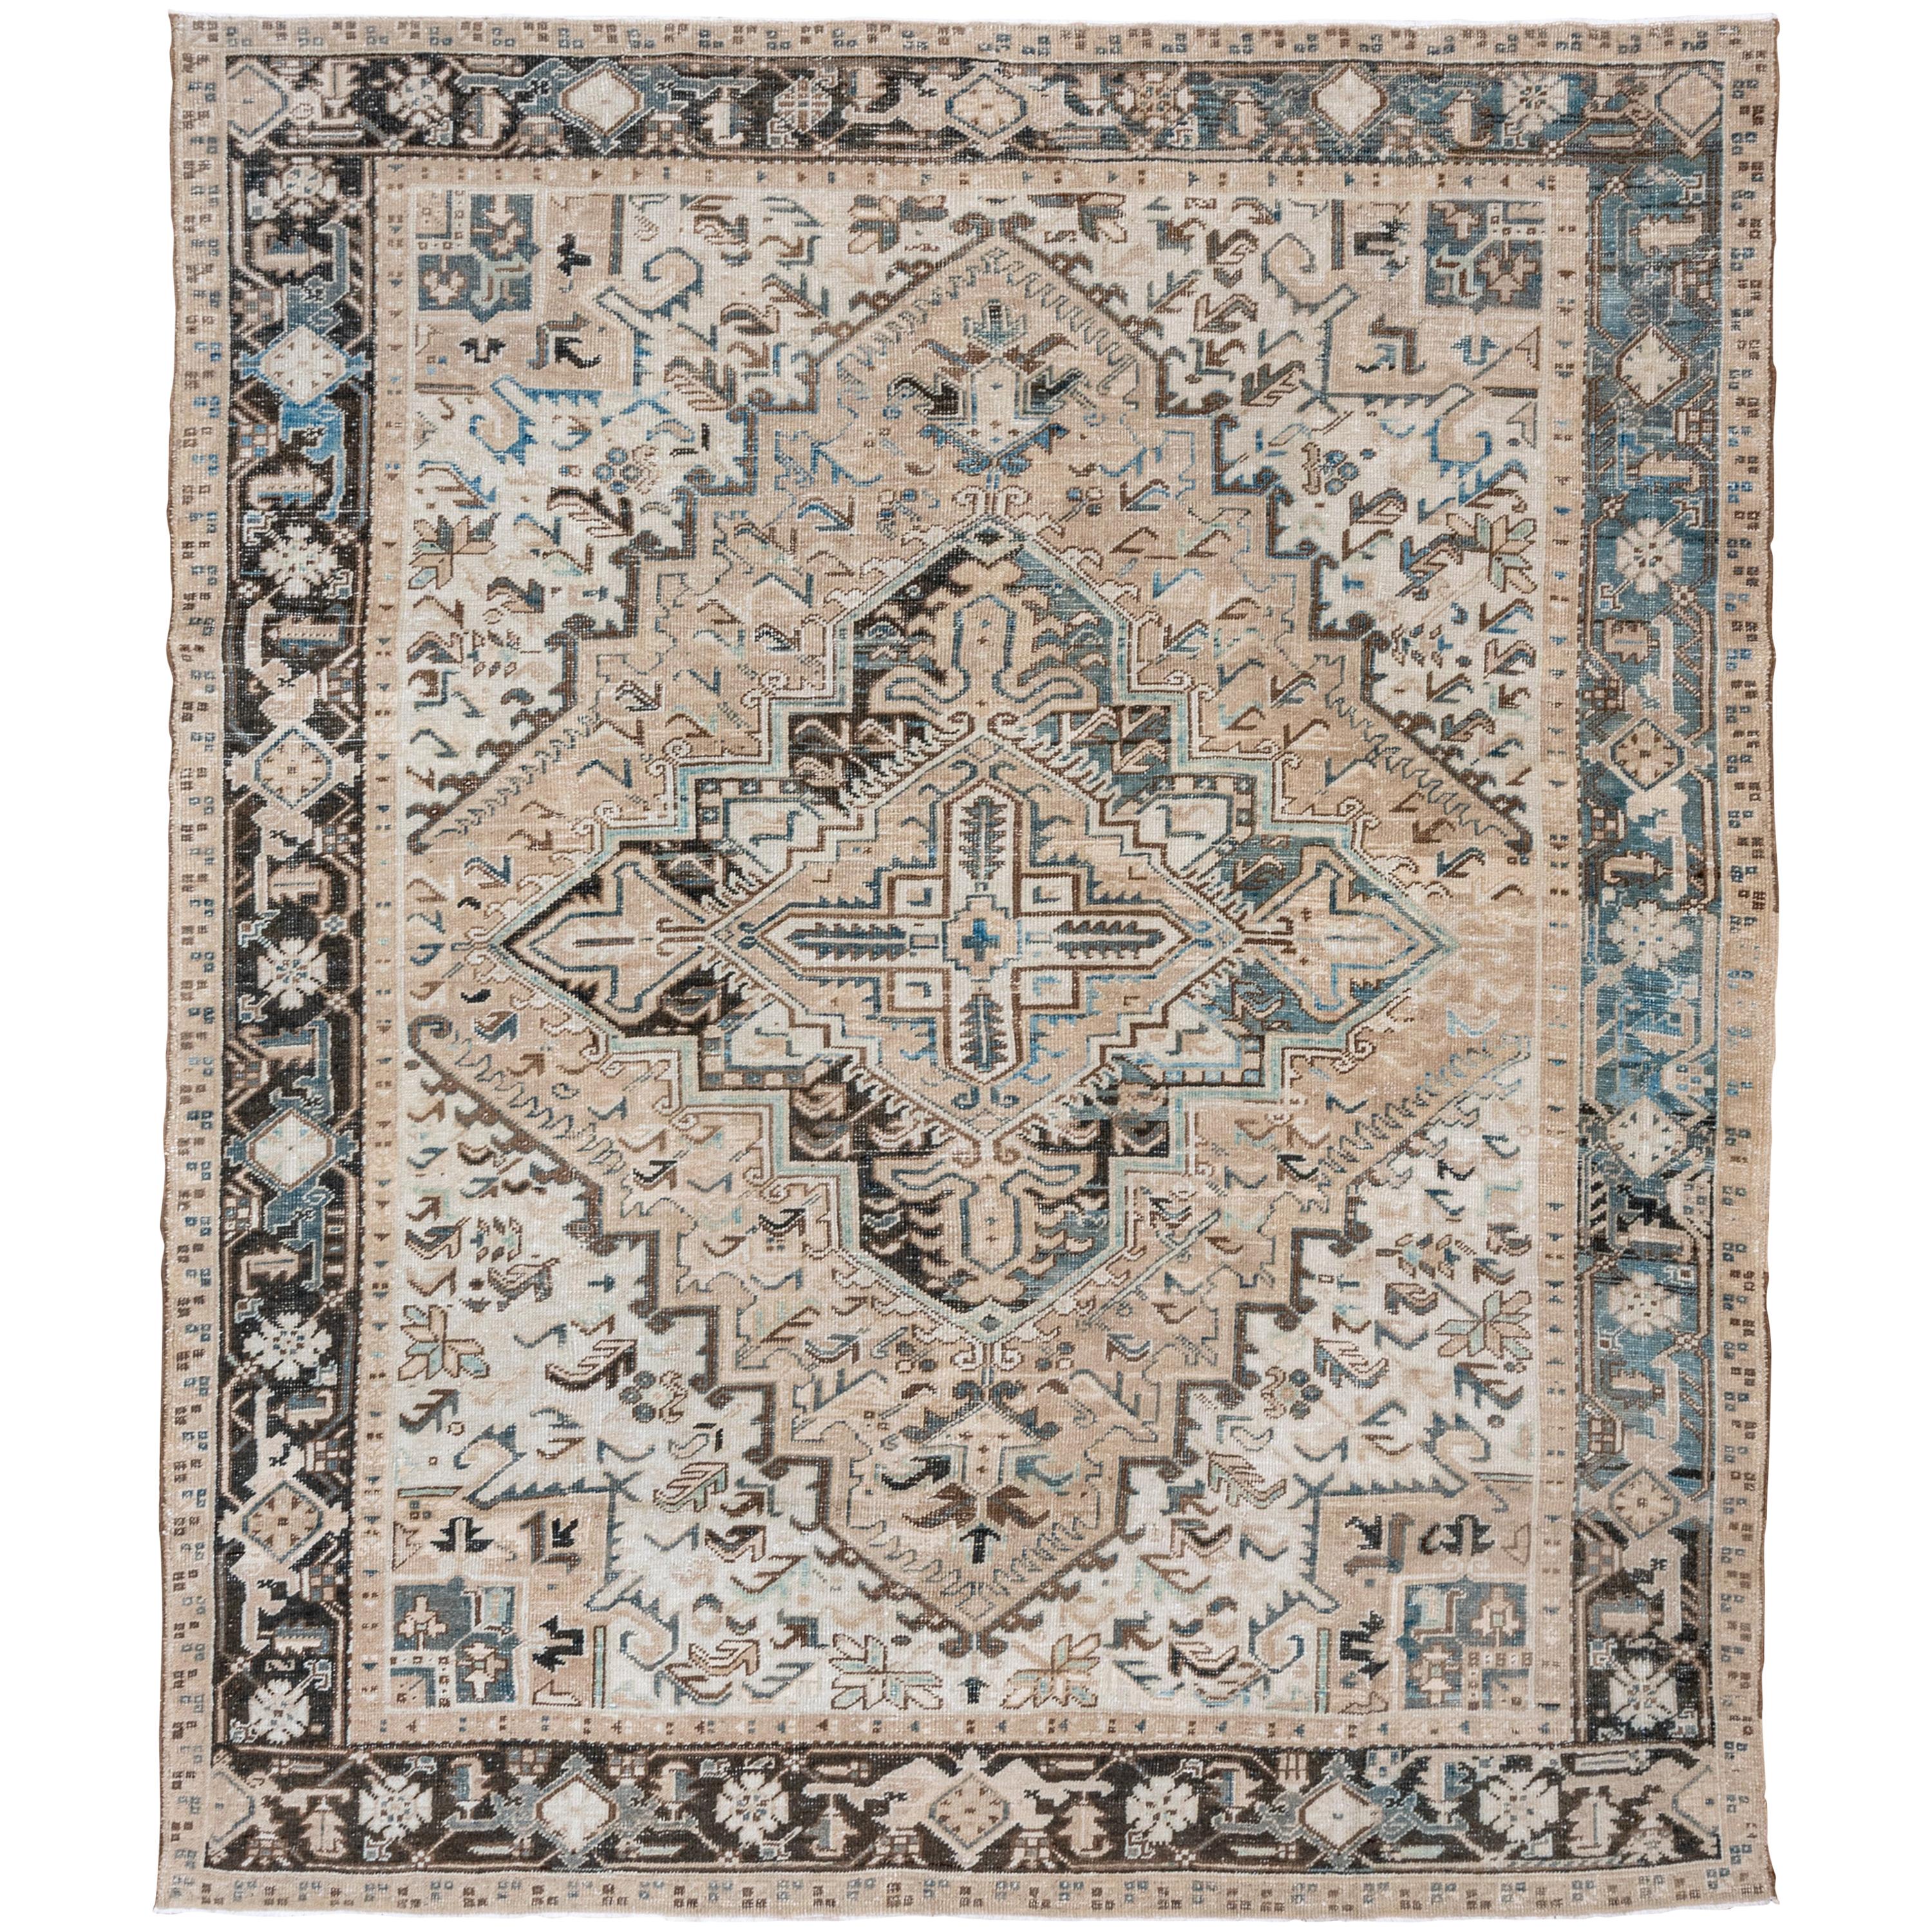 Antique Ivory Persian Heriz Rug, Ivory and Beige Field Dark Borders Blue Accents